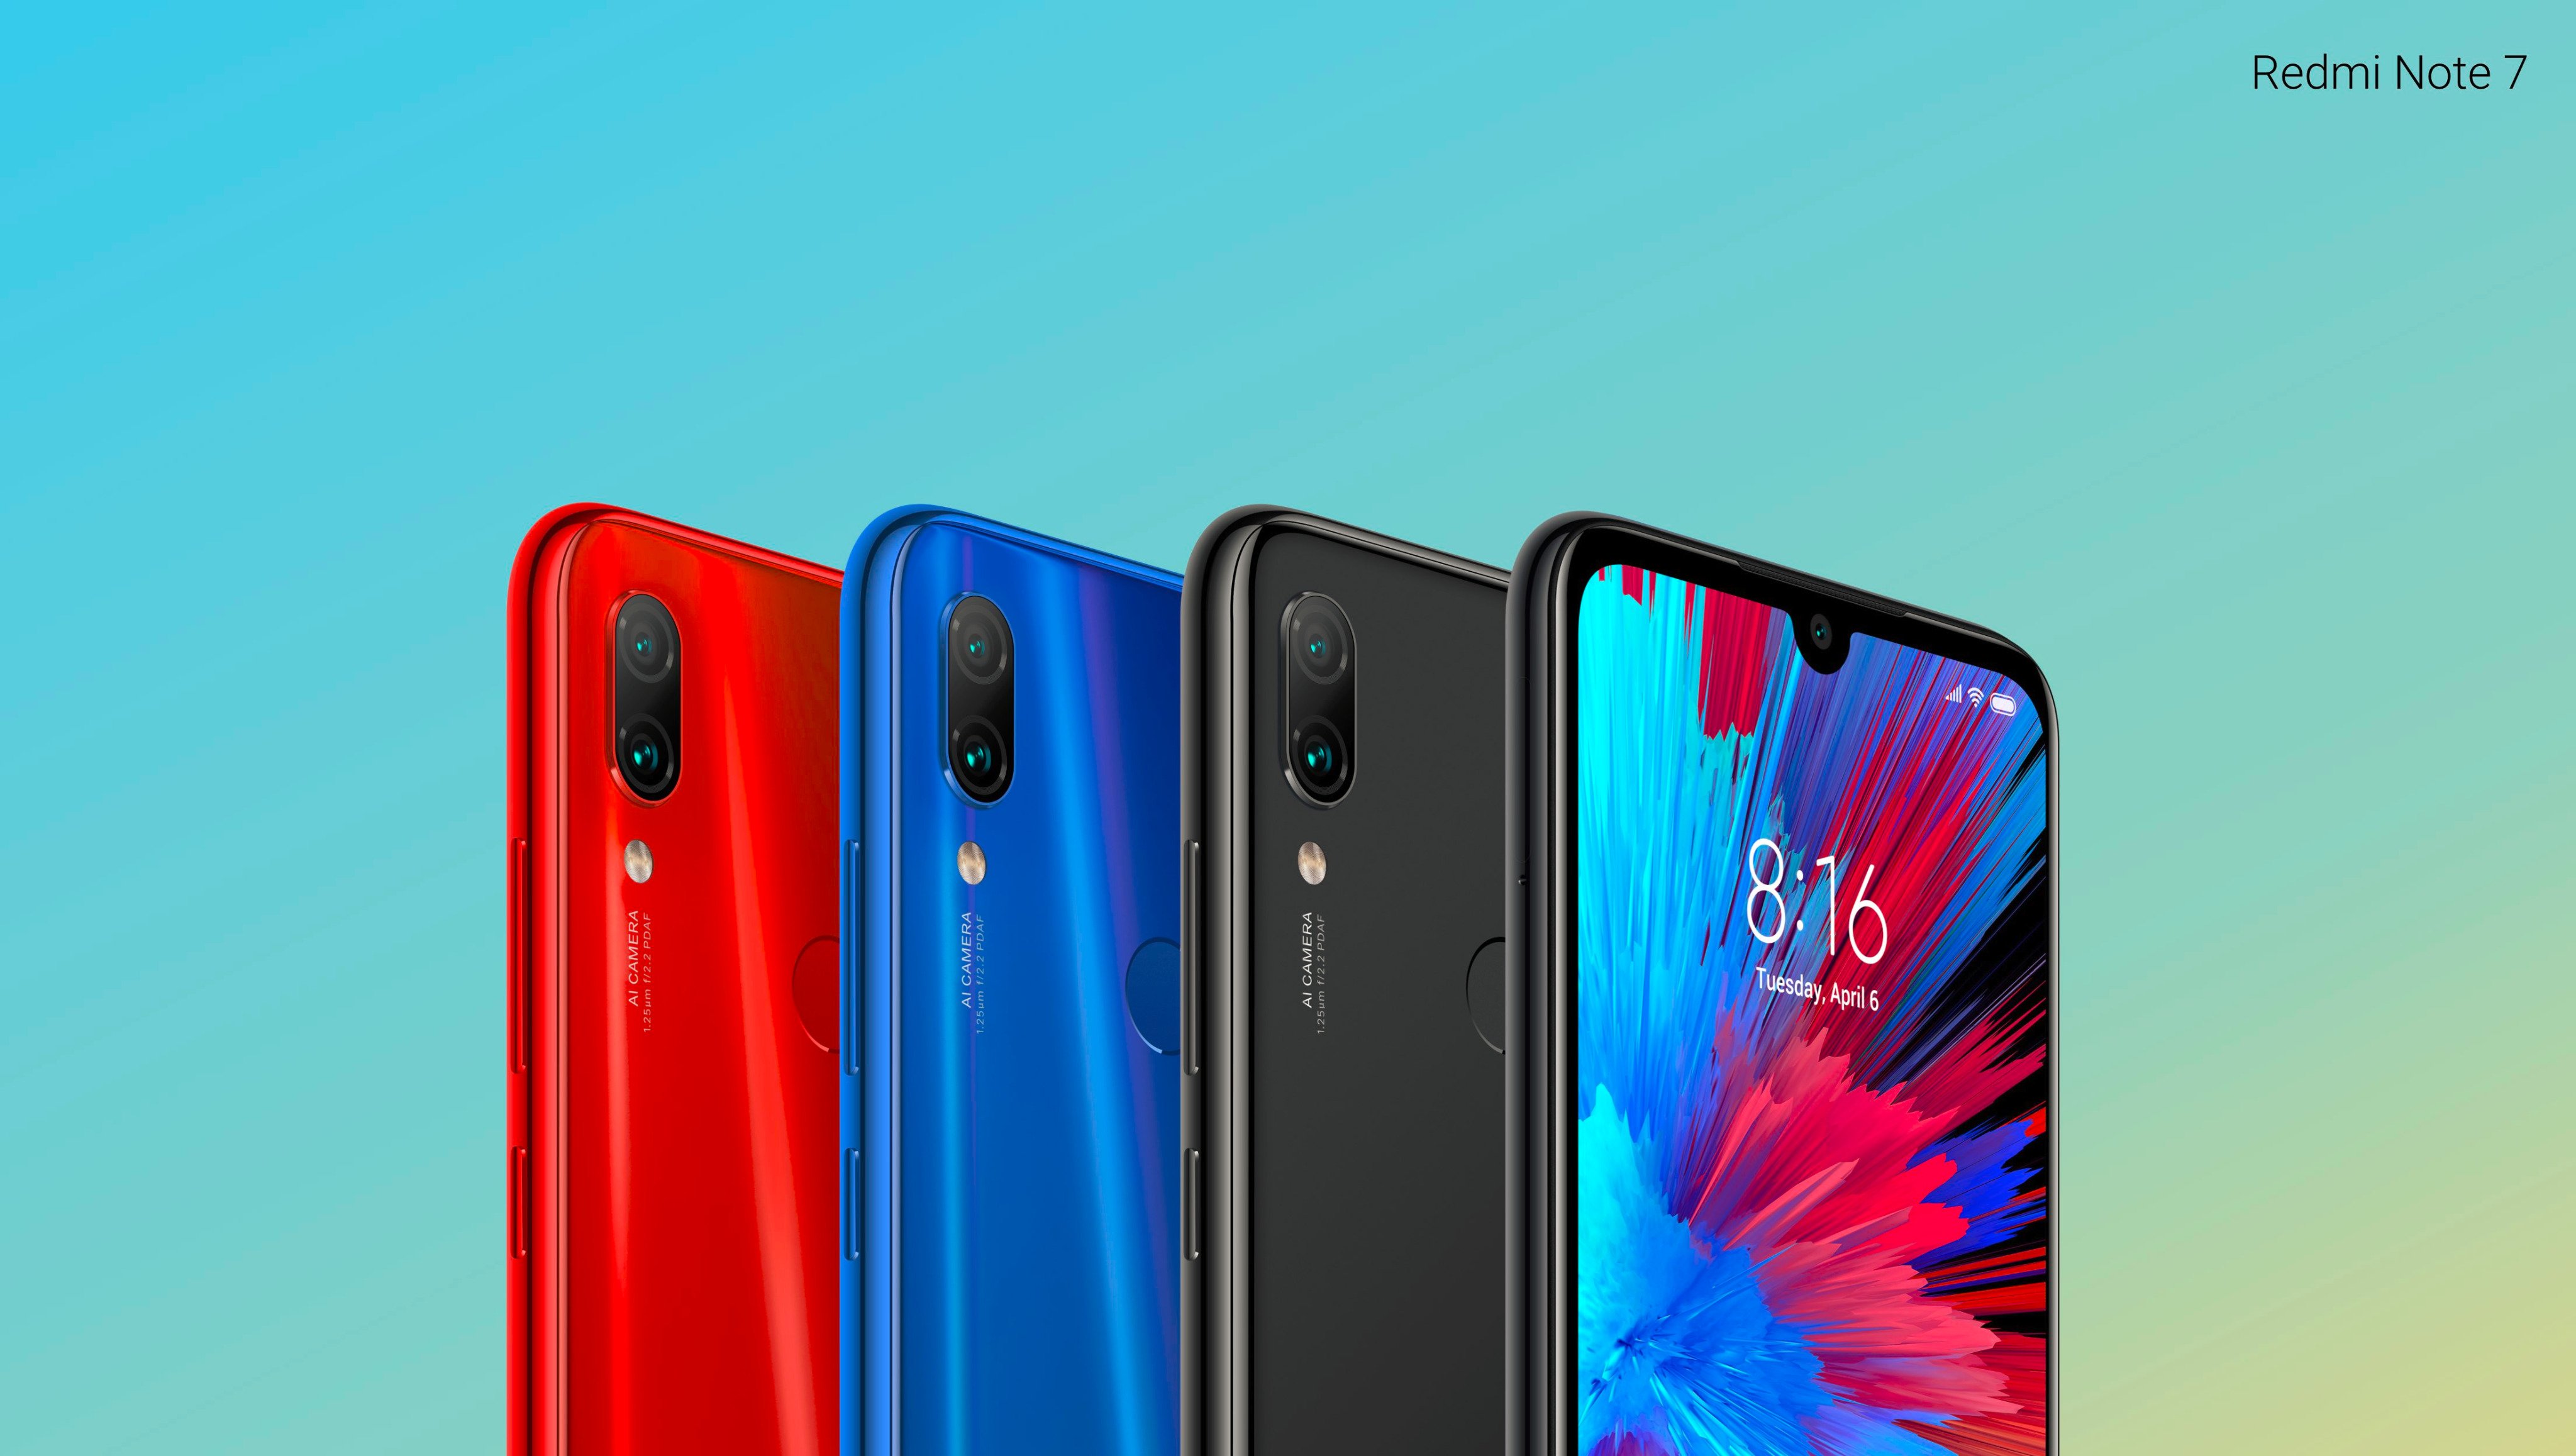 Xiaomi Redmi Note 7 launches in India with Snapdragon 660 